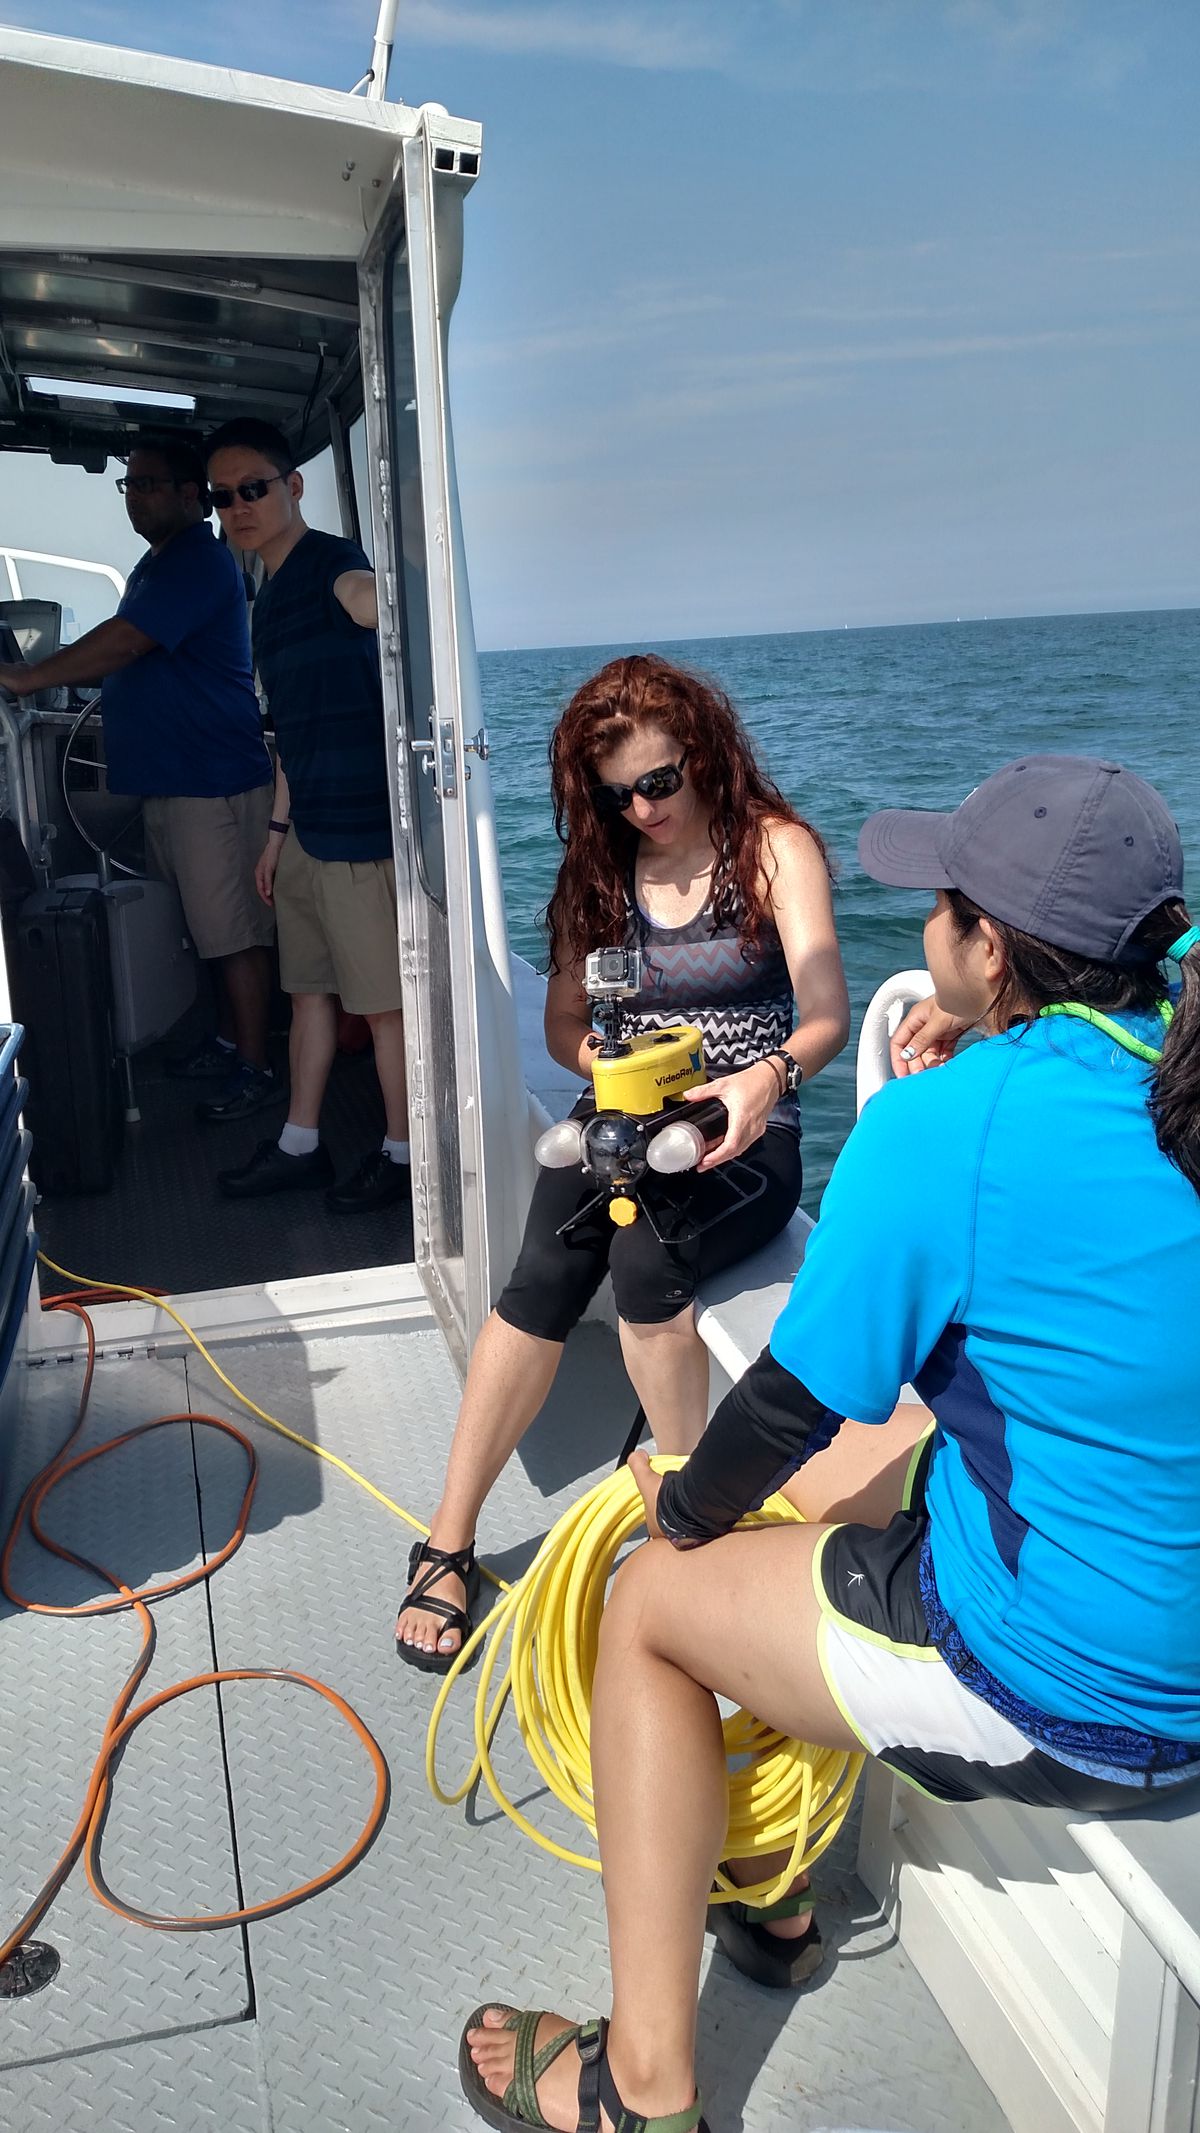 Sabrina Bainbridge of the Shedd Aquarium’s Learning Team holds the ROV before putting it on Morgan Shoal while leader Belle Archaphorn prepares to handle the ROV tether.<br>Credit: Dale Bowman